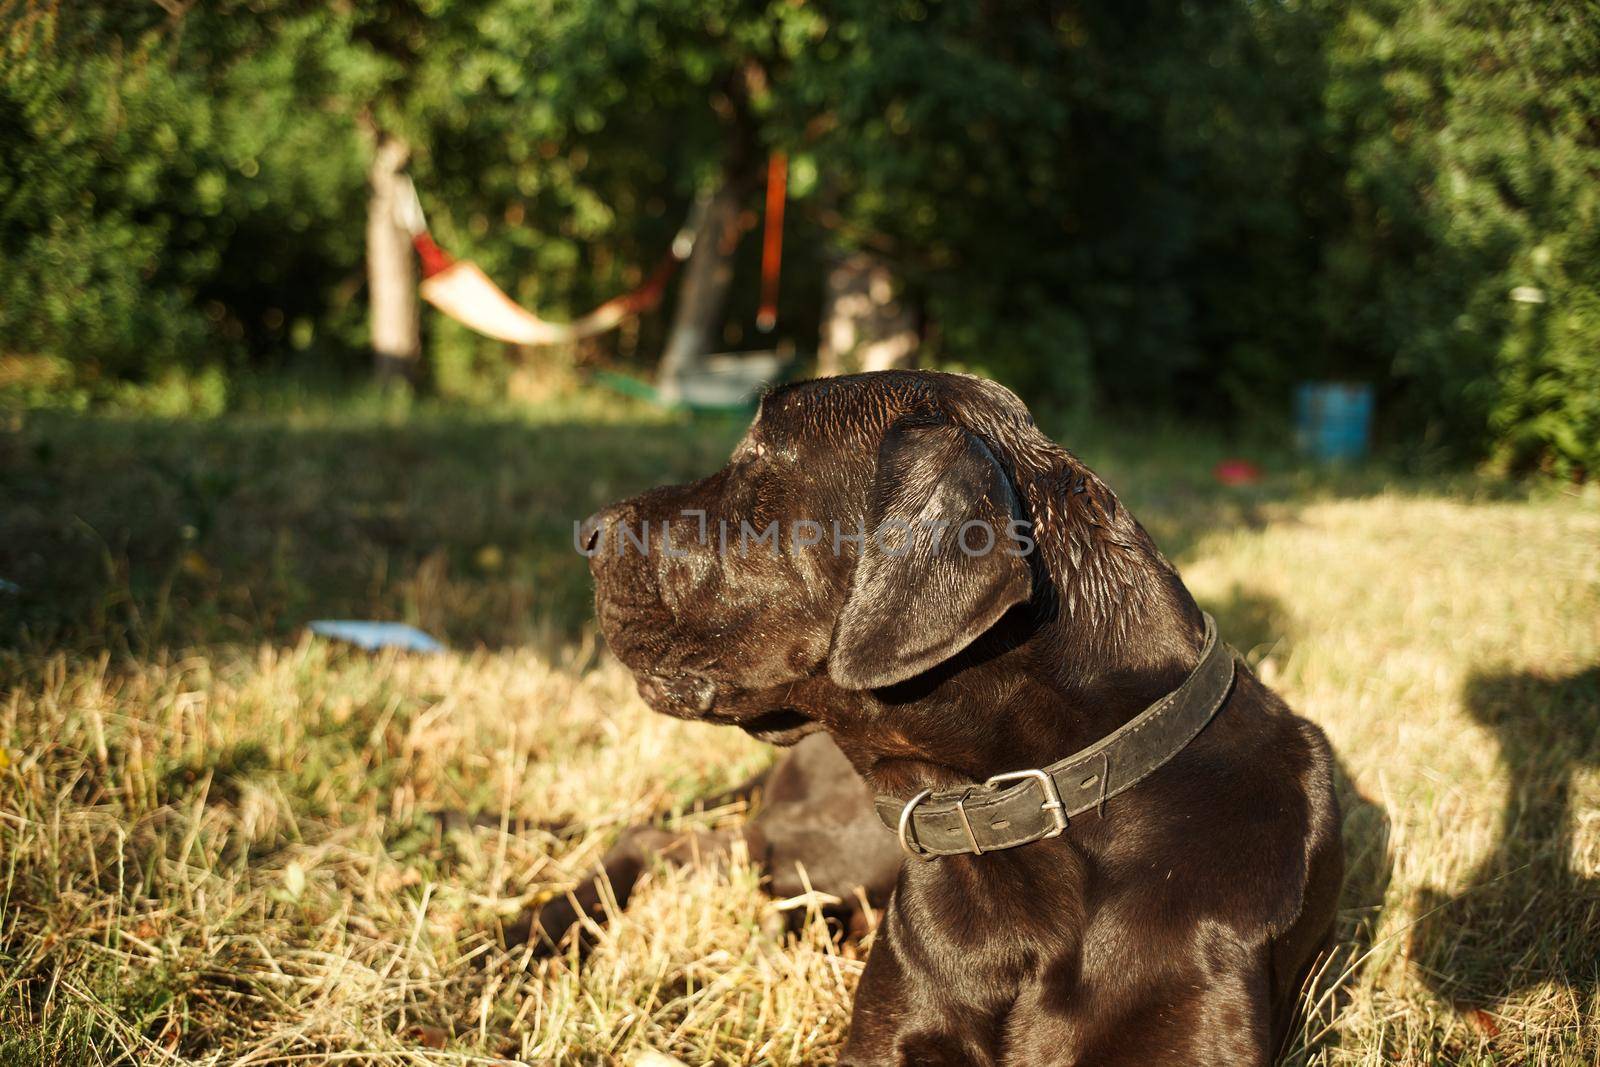 large purebred black dog outdoors in the field pets. High quality photo